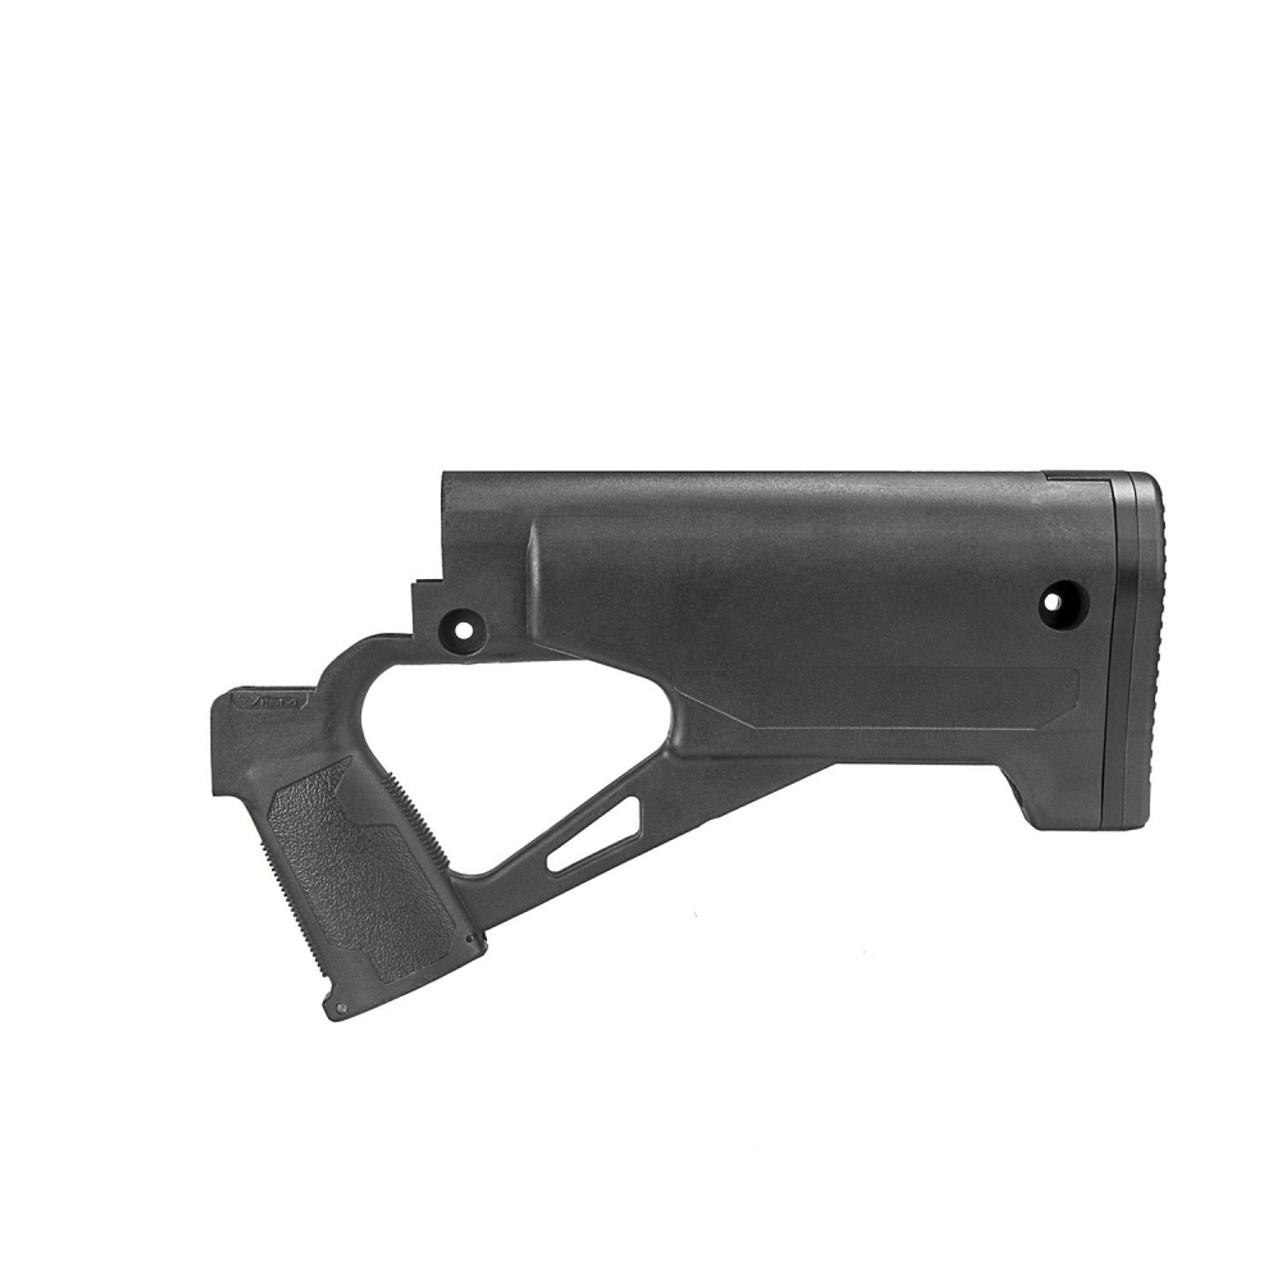 NcSTAR VKARSTK Mil-Spec 223/556 Thumbhole Stock W/Storage Compartment & Rubber Butt Pad